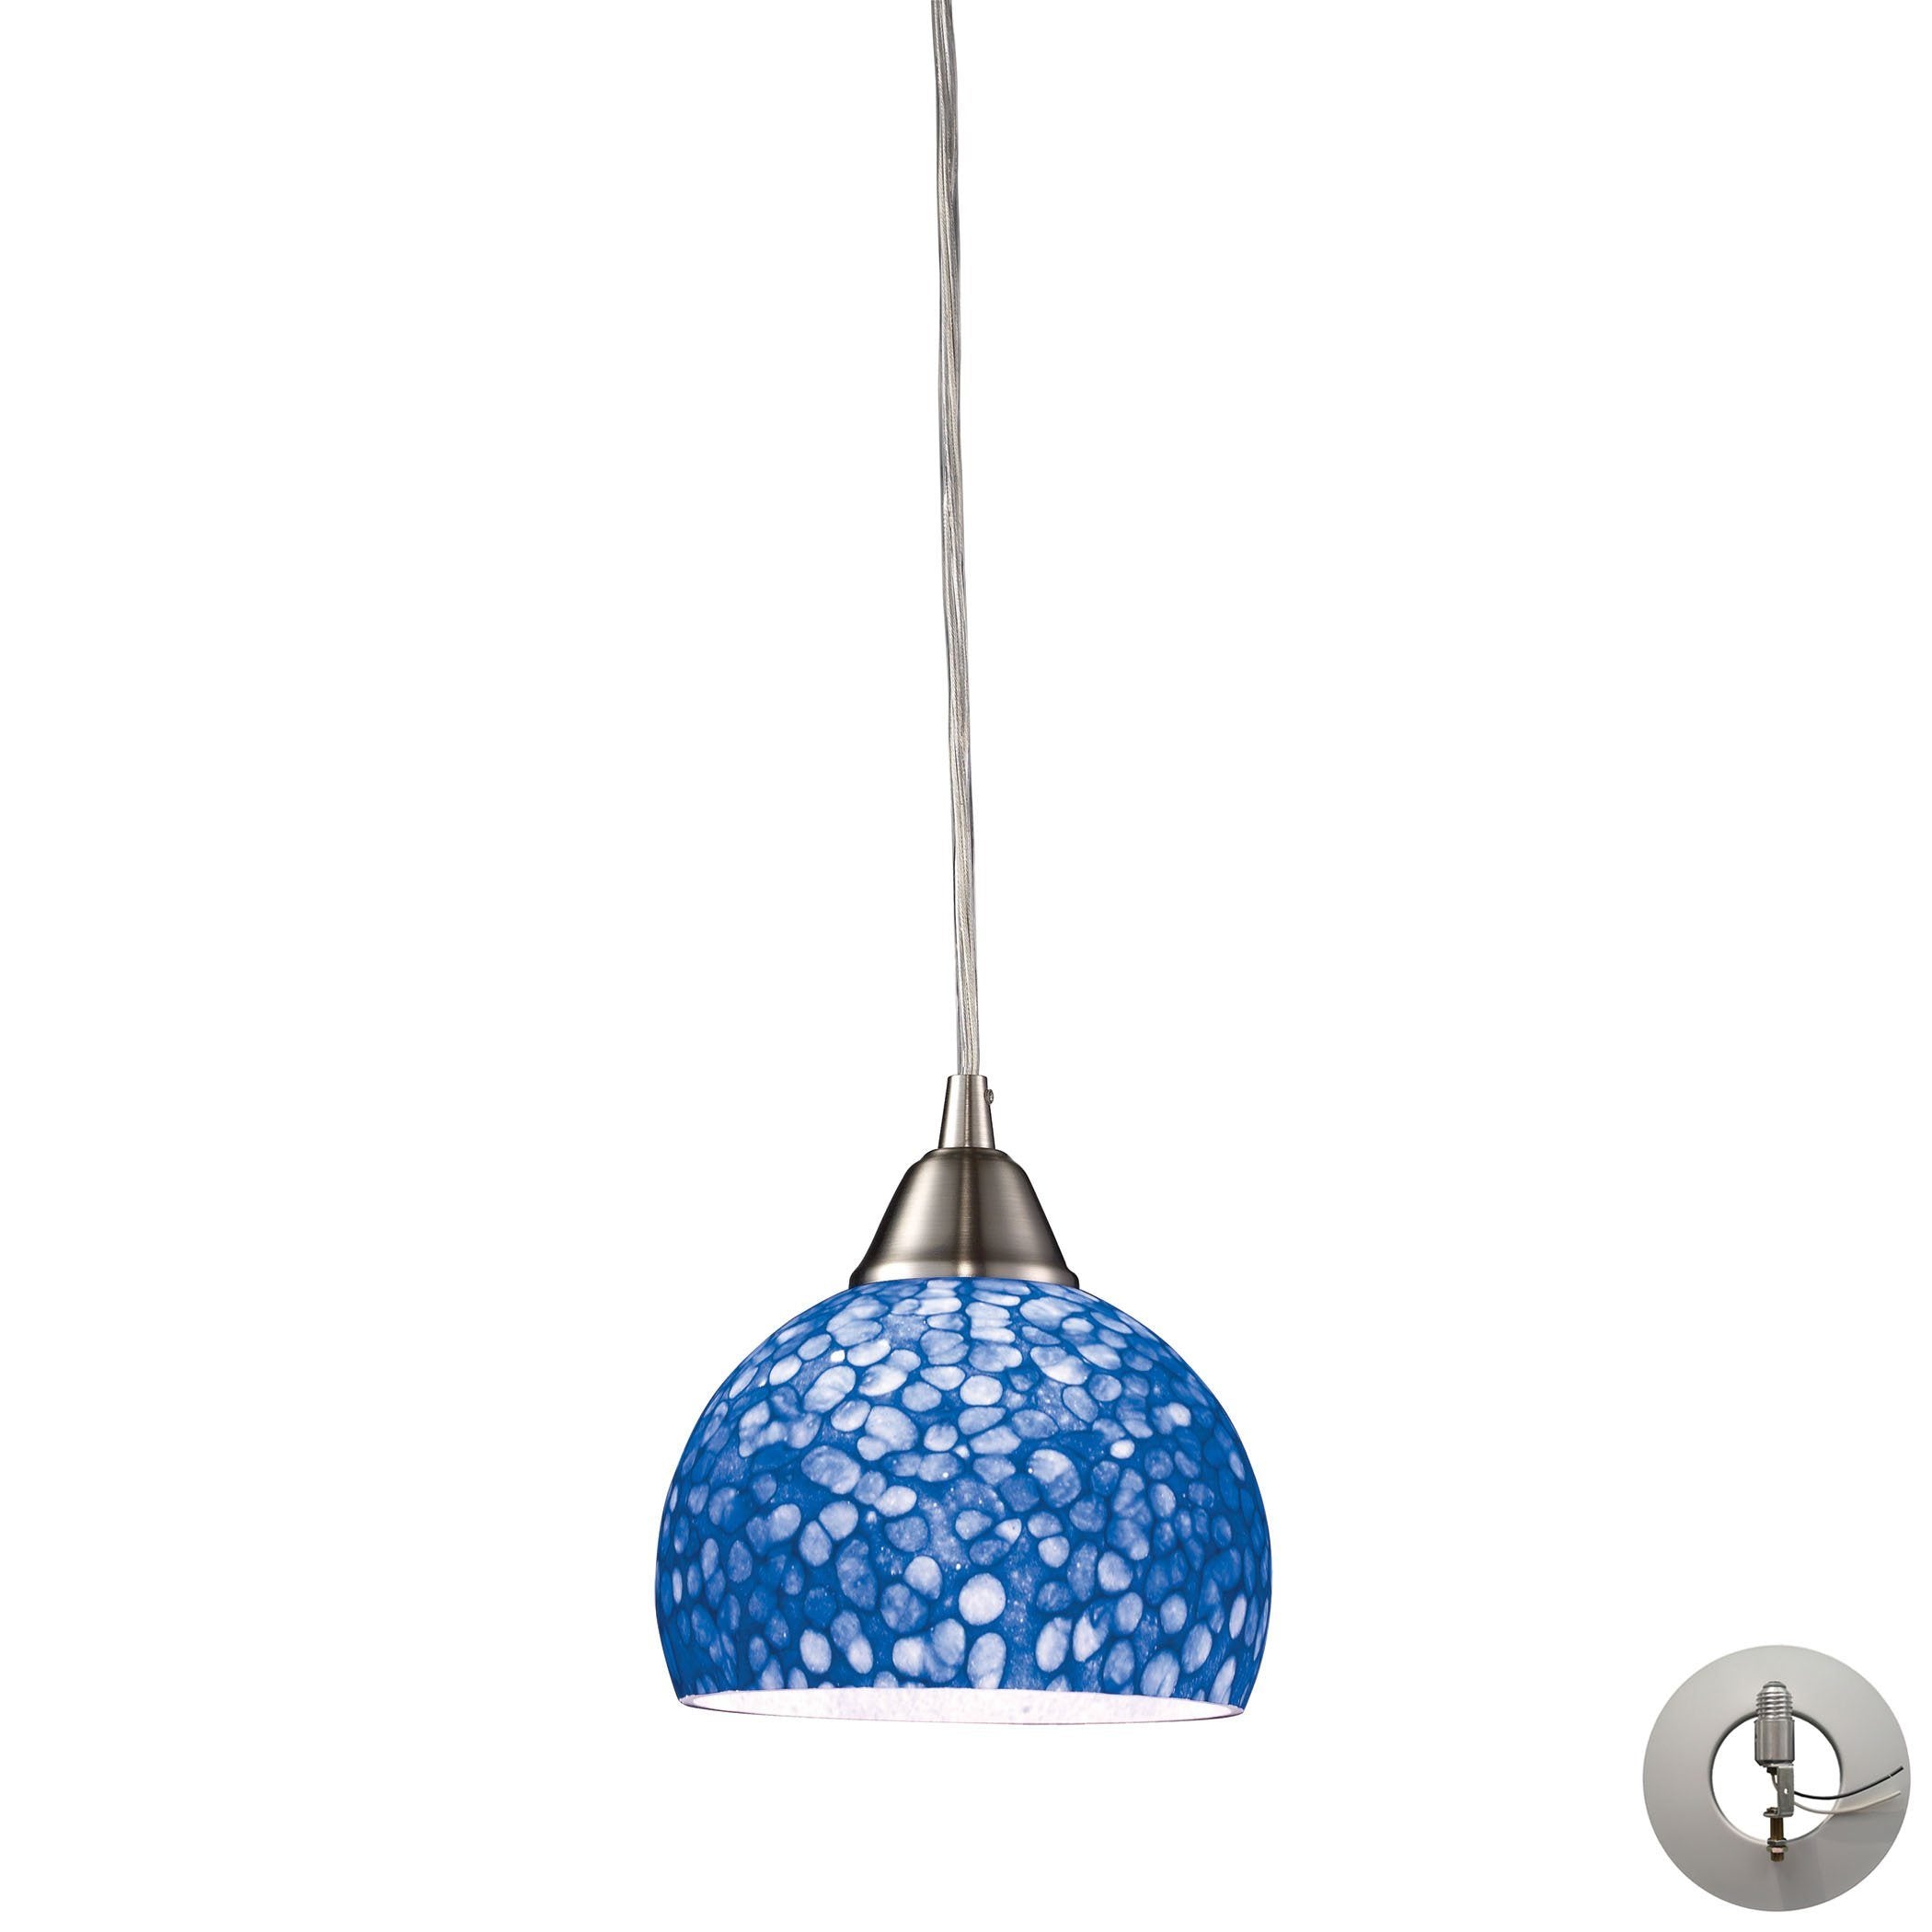 Cira Pendant In Satin Nickel With Pebbled Blue Glass - Includes Recessed Lighting Kit Ceiling Elk Lighting 